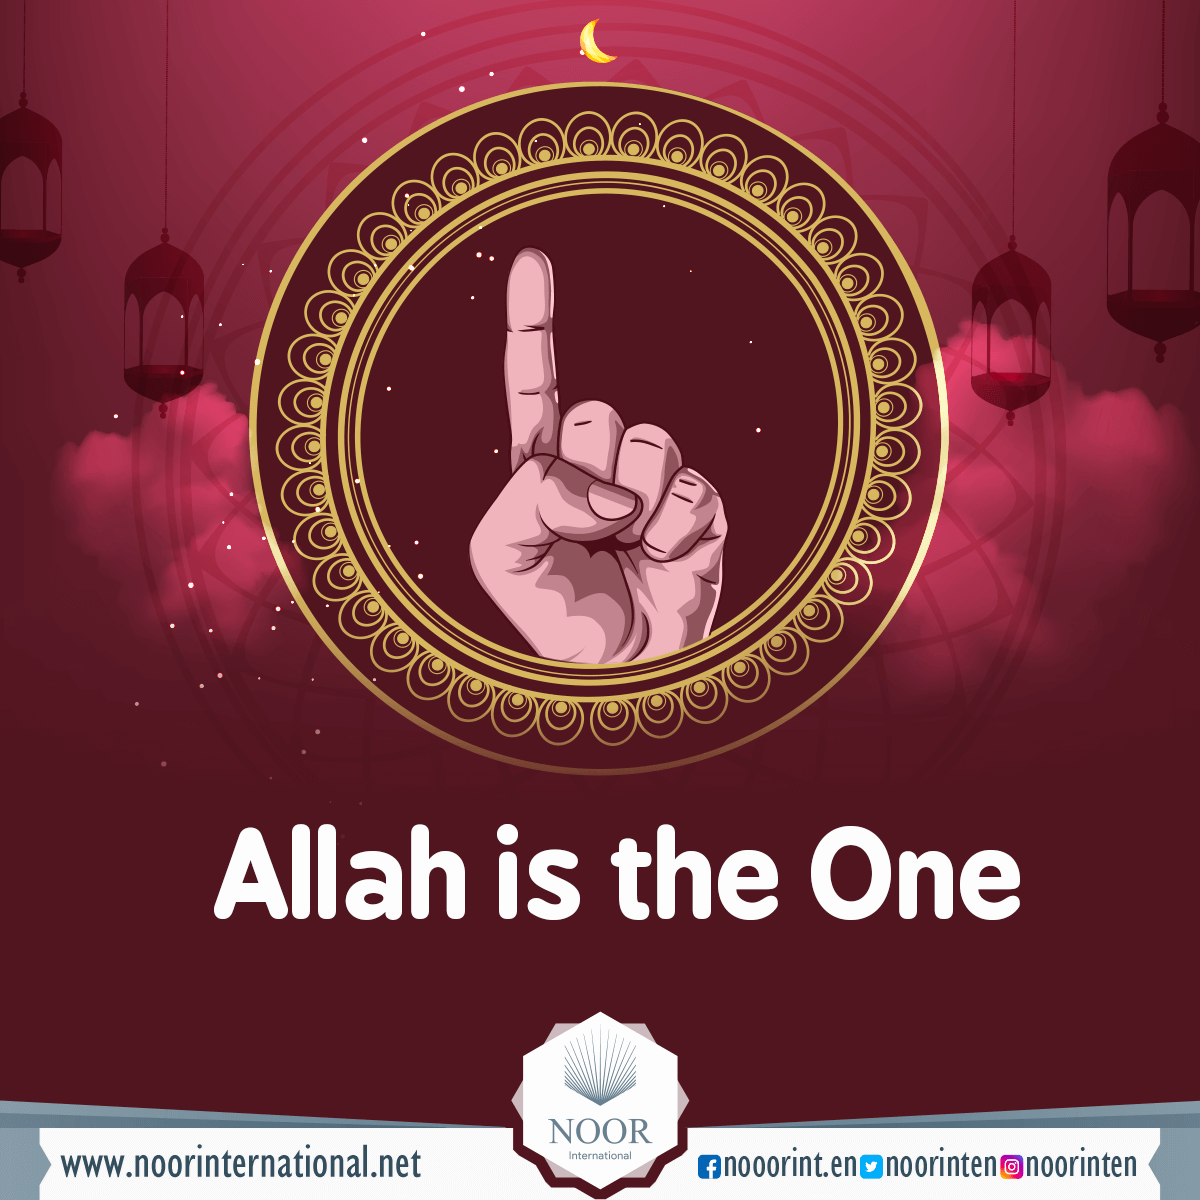 Allah is the One.